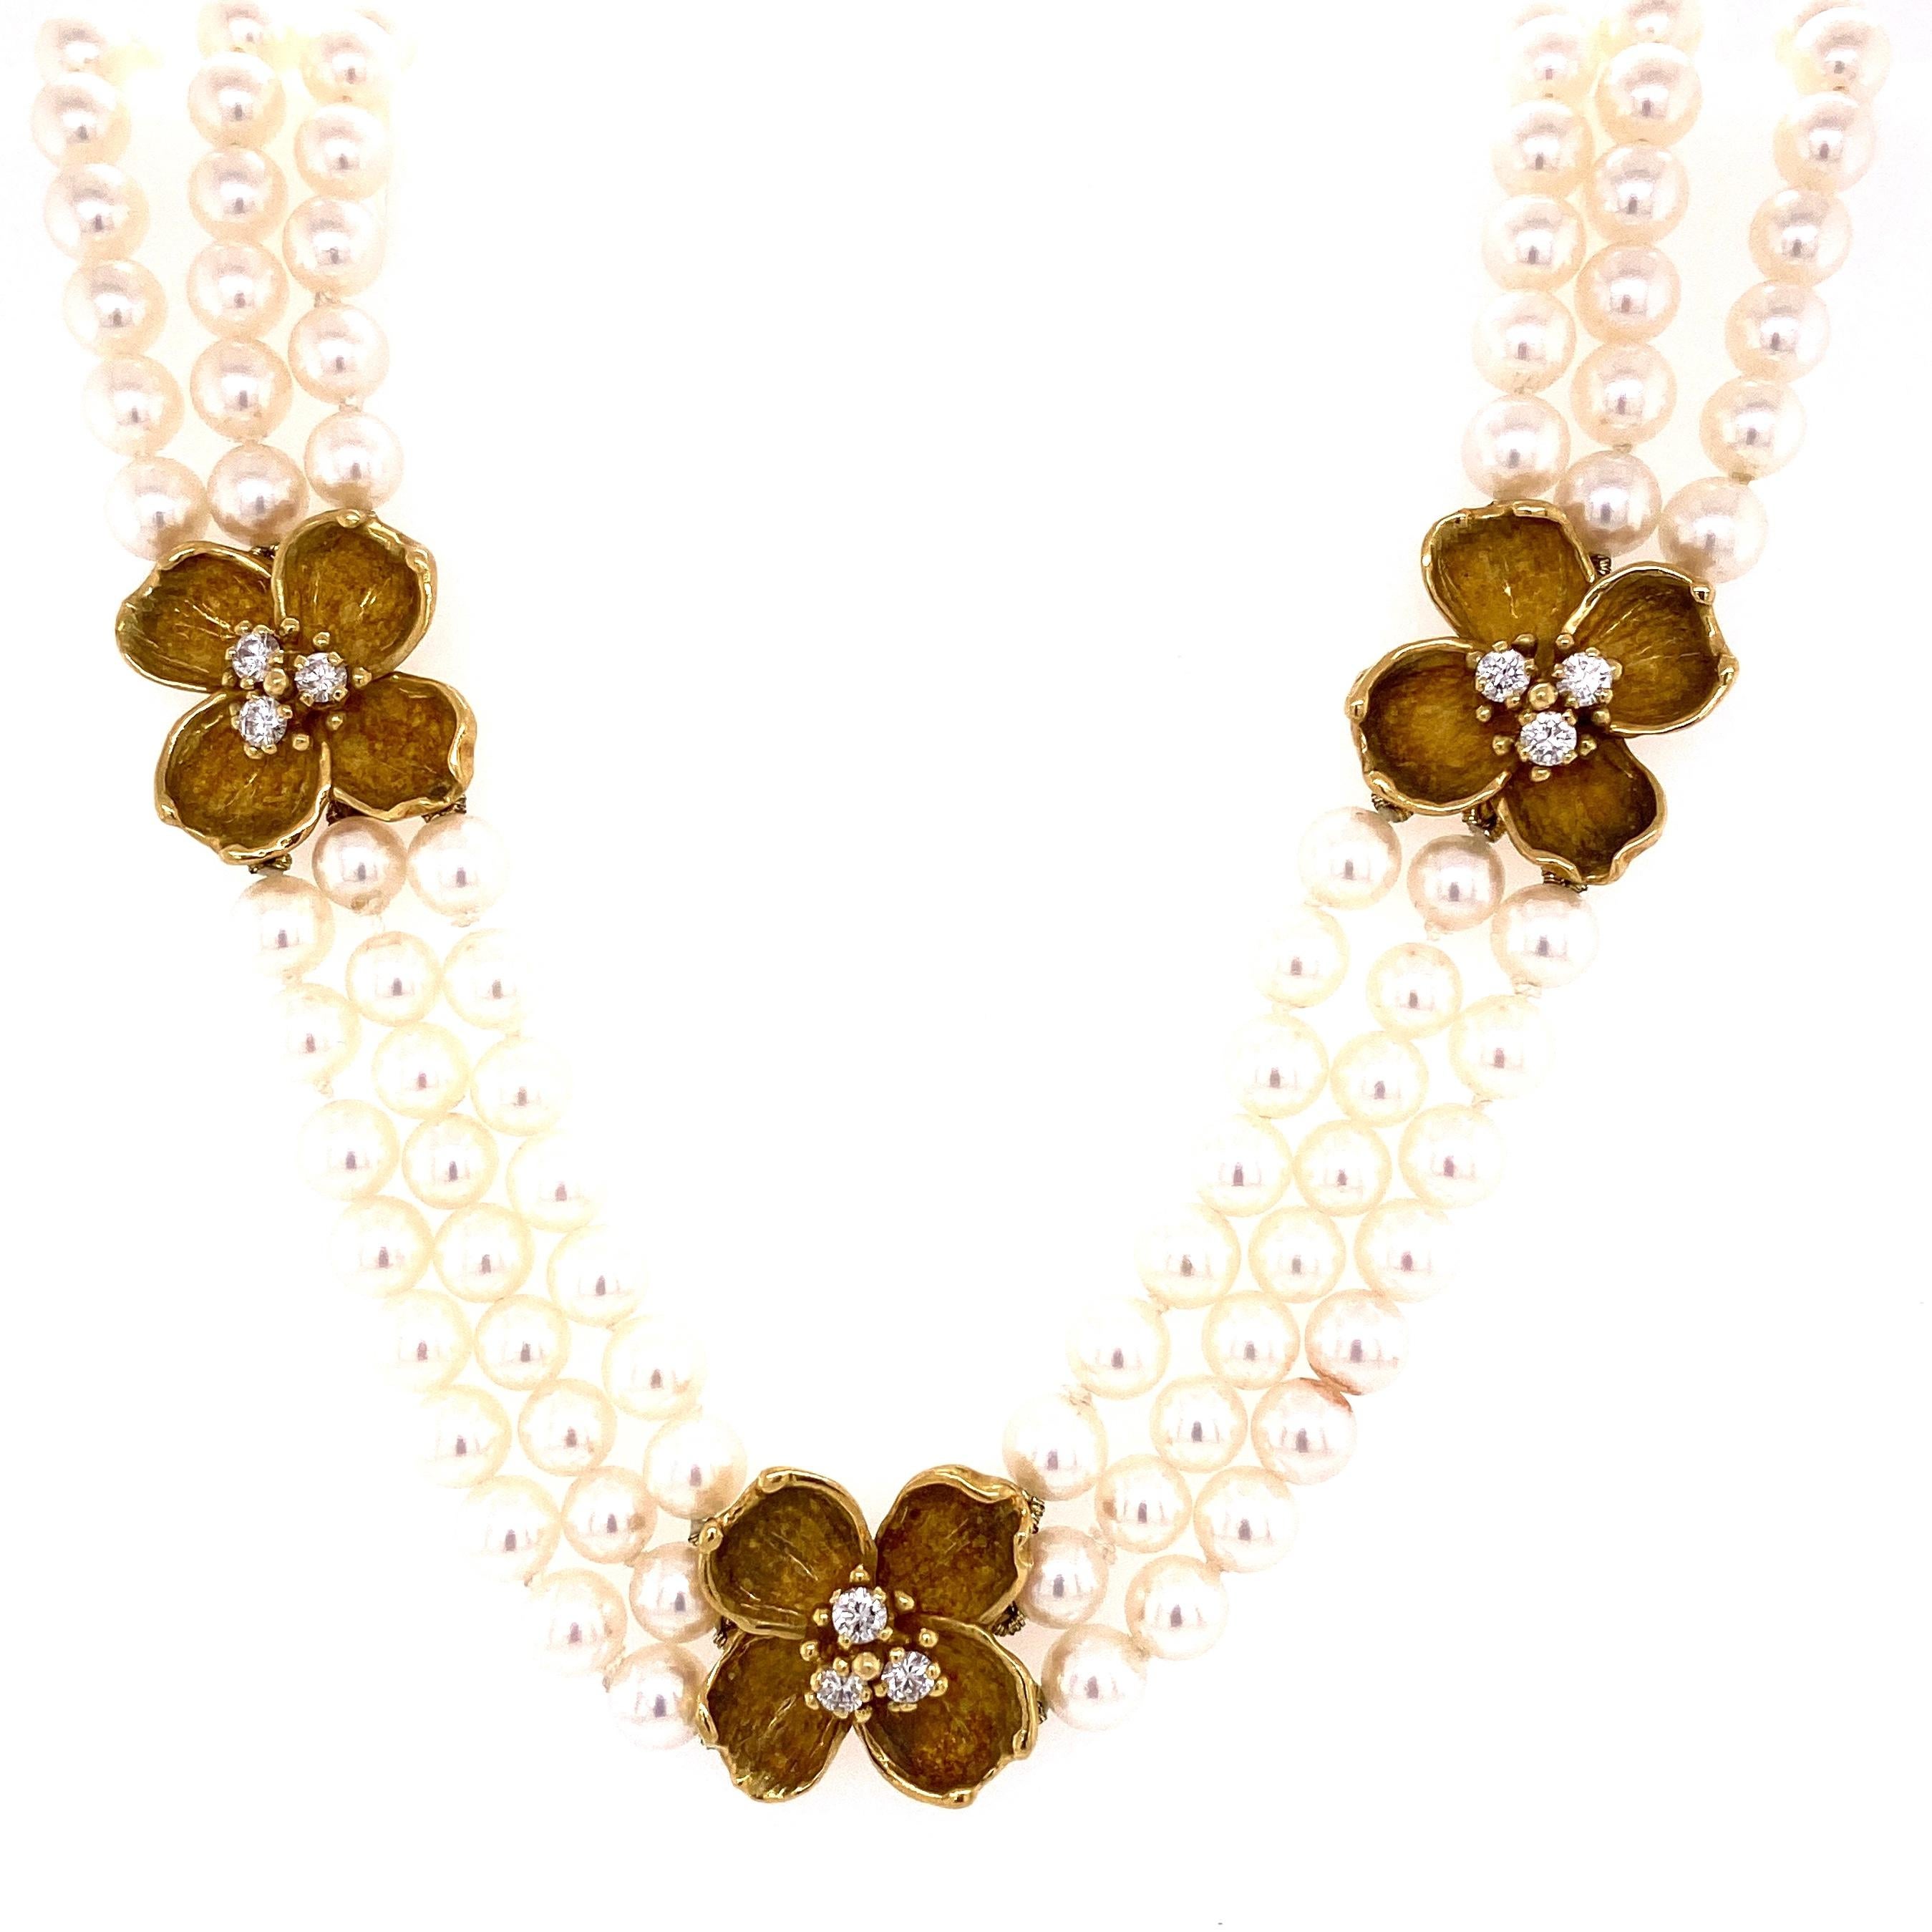 
Simply Beautiful and finely detailed TIFFANY & CO Triple Strand size Pearl Necklace with Four 750/18 Karat Yellow Gold Flower Stations set with Diamonds, approx. 1.00 total Carat weight. Approx. size of pearls:  5.5mm and approx. length of necklace